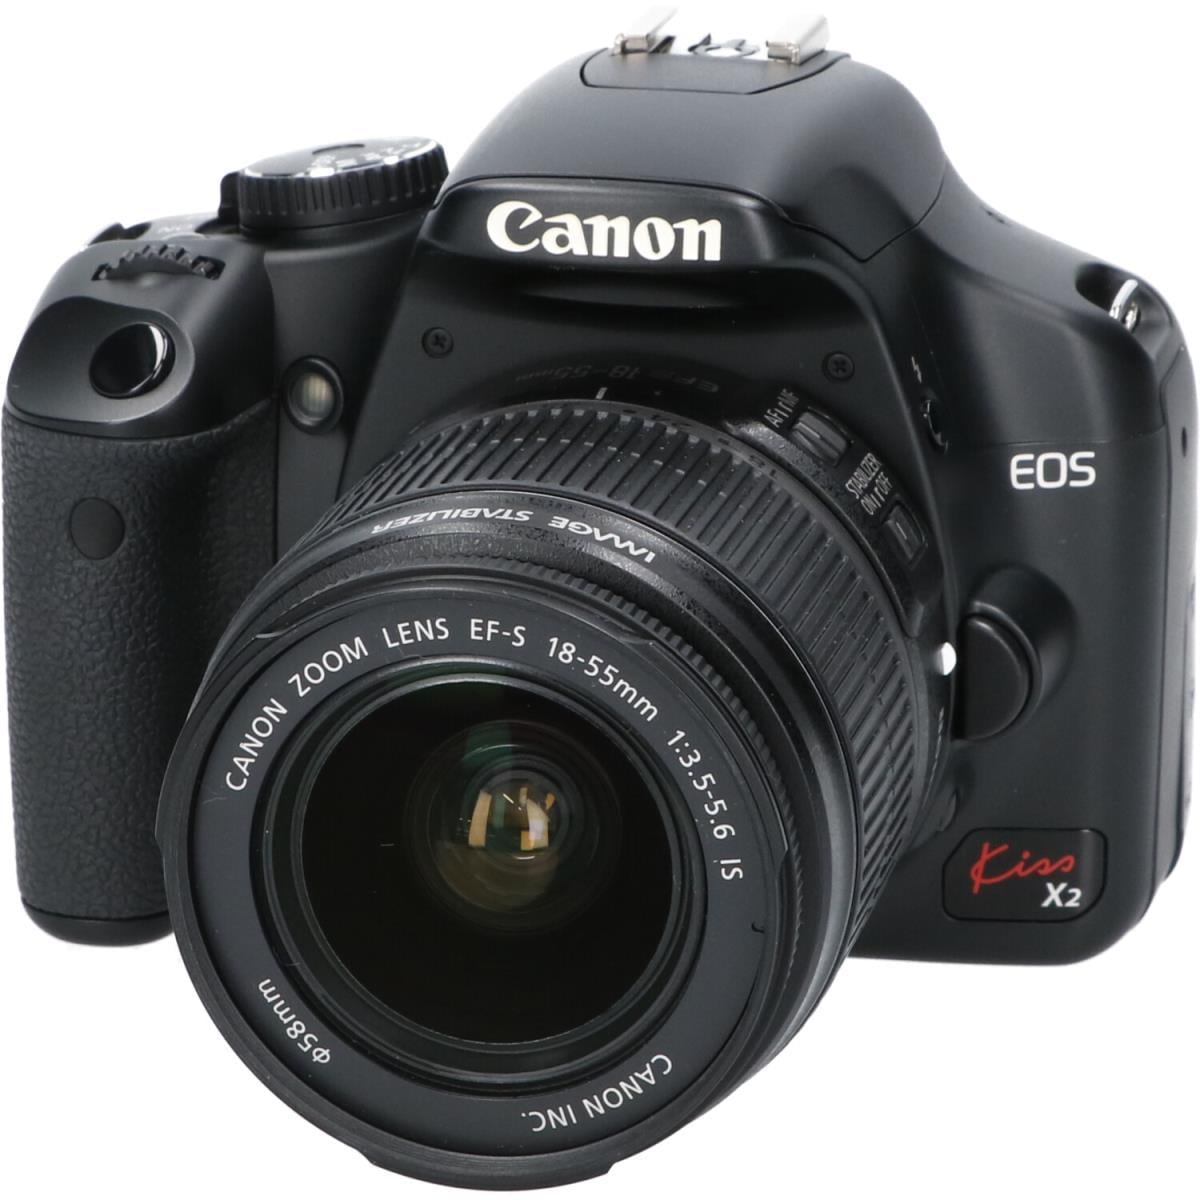 CANON EOS KISS X2 18-55IS KIT